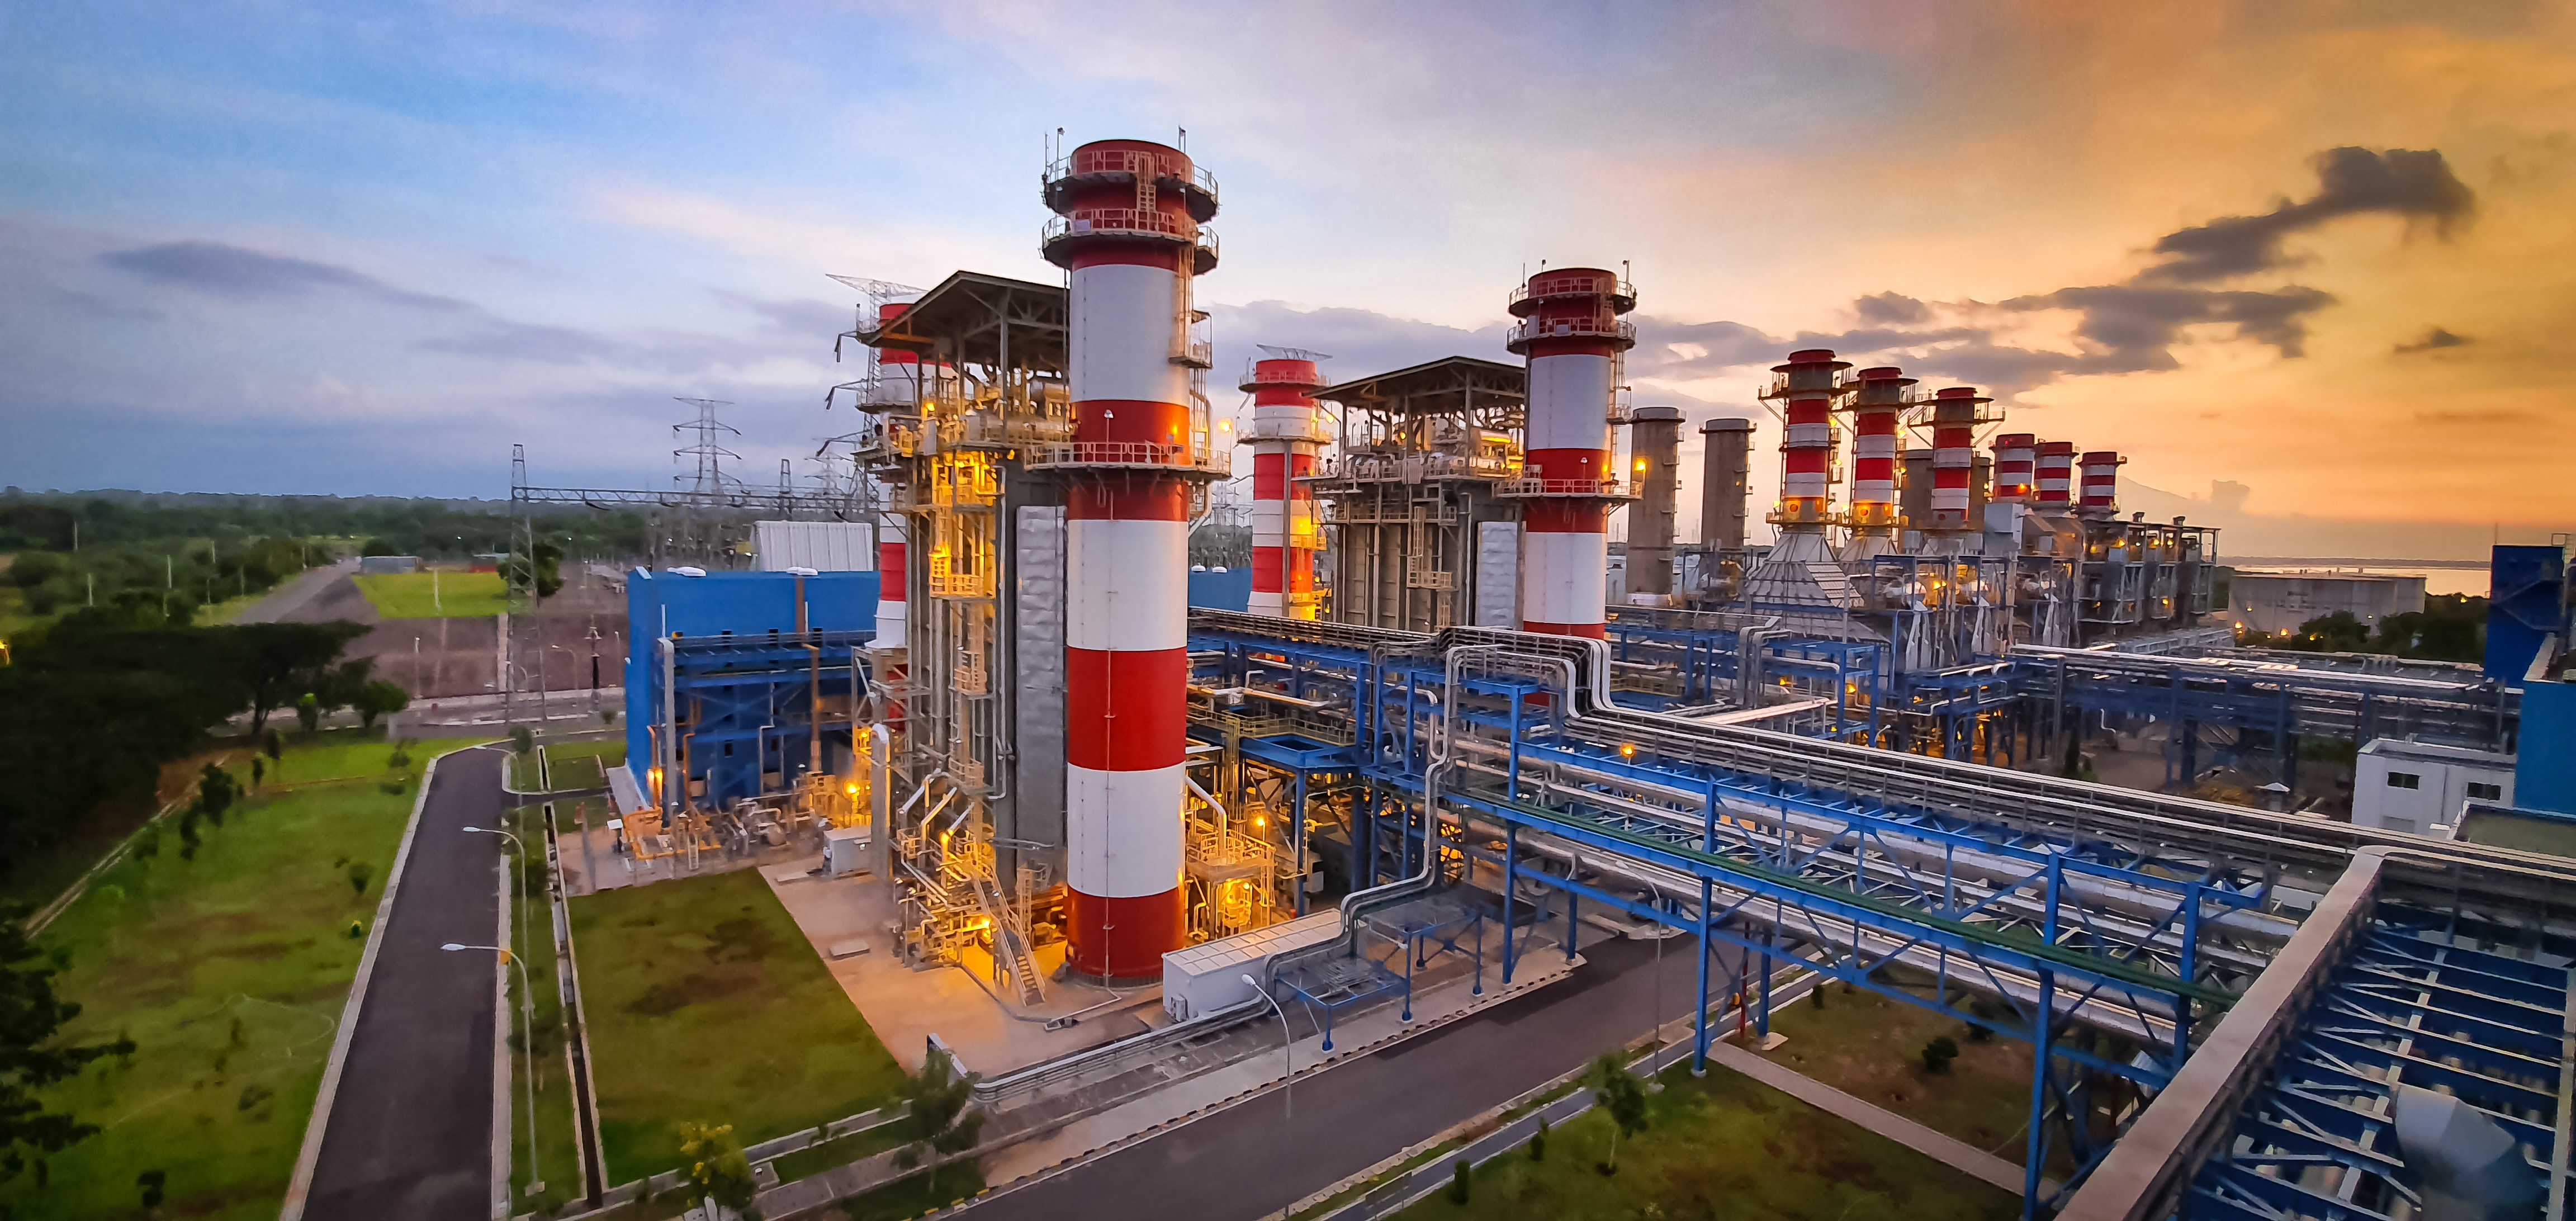 S-P-03273 ELECTRICITY GRATI POWER GENERATION AND SERVICE UNIT COMBINED-CYCLE POWER PLANT